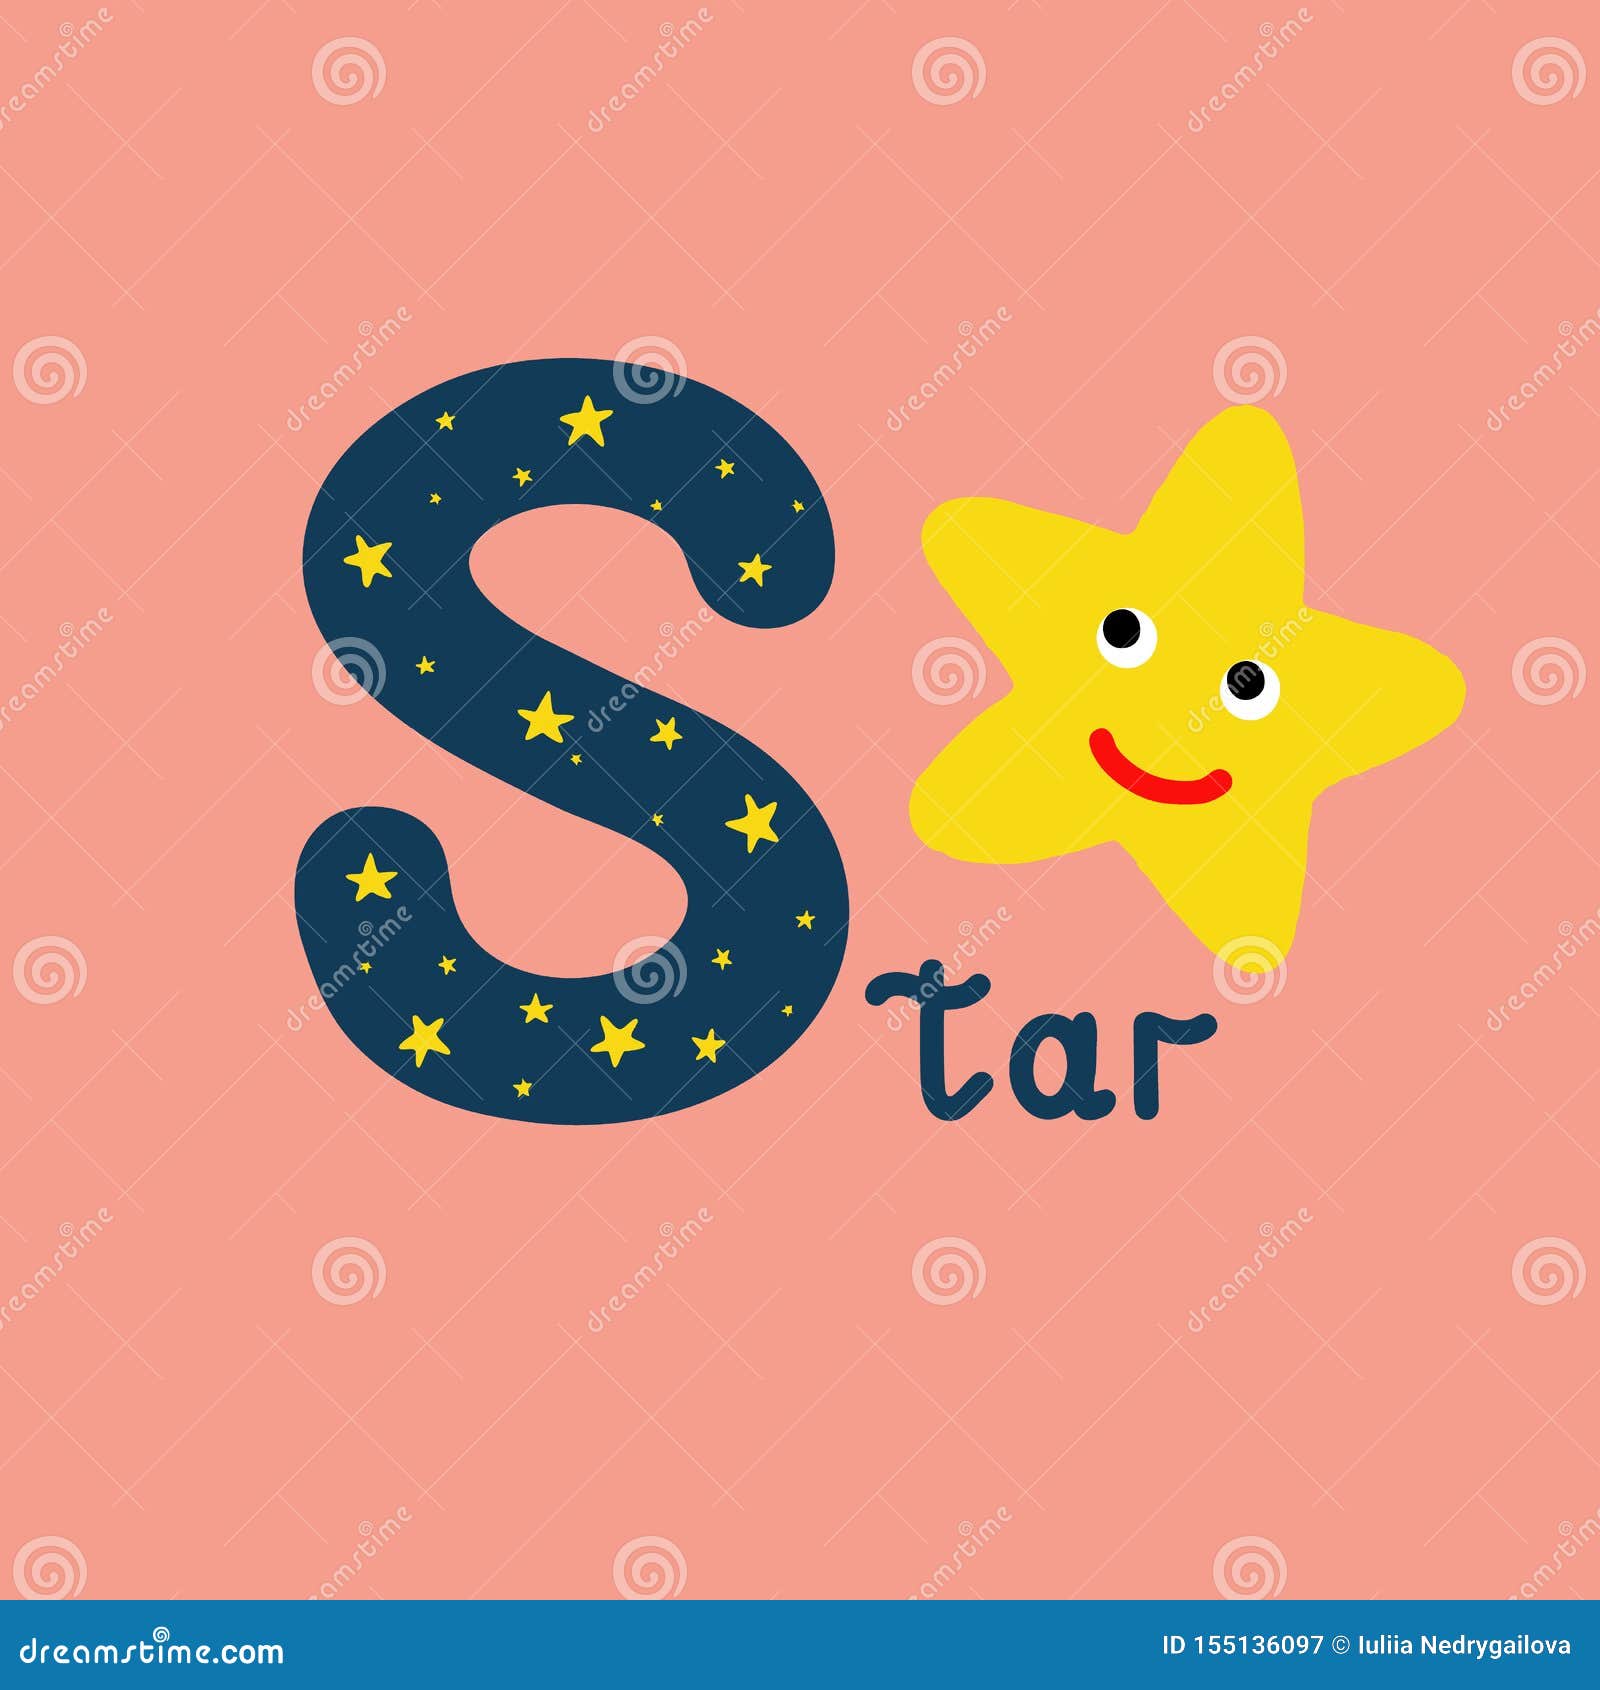 English Alphabet For Children Education, Letter S Uppercase With Word